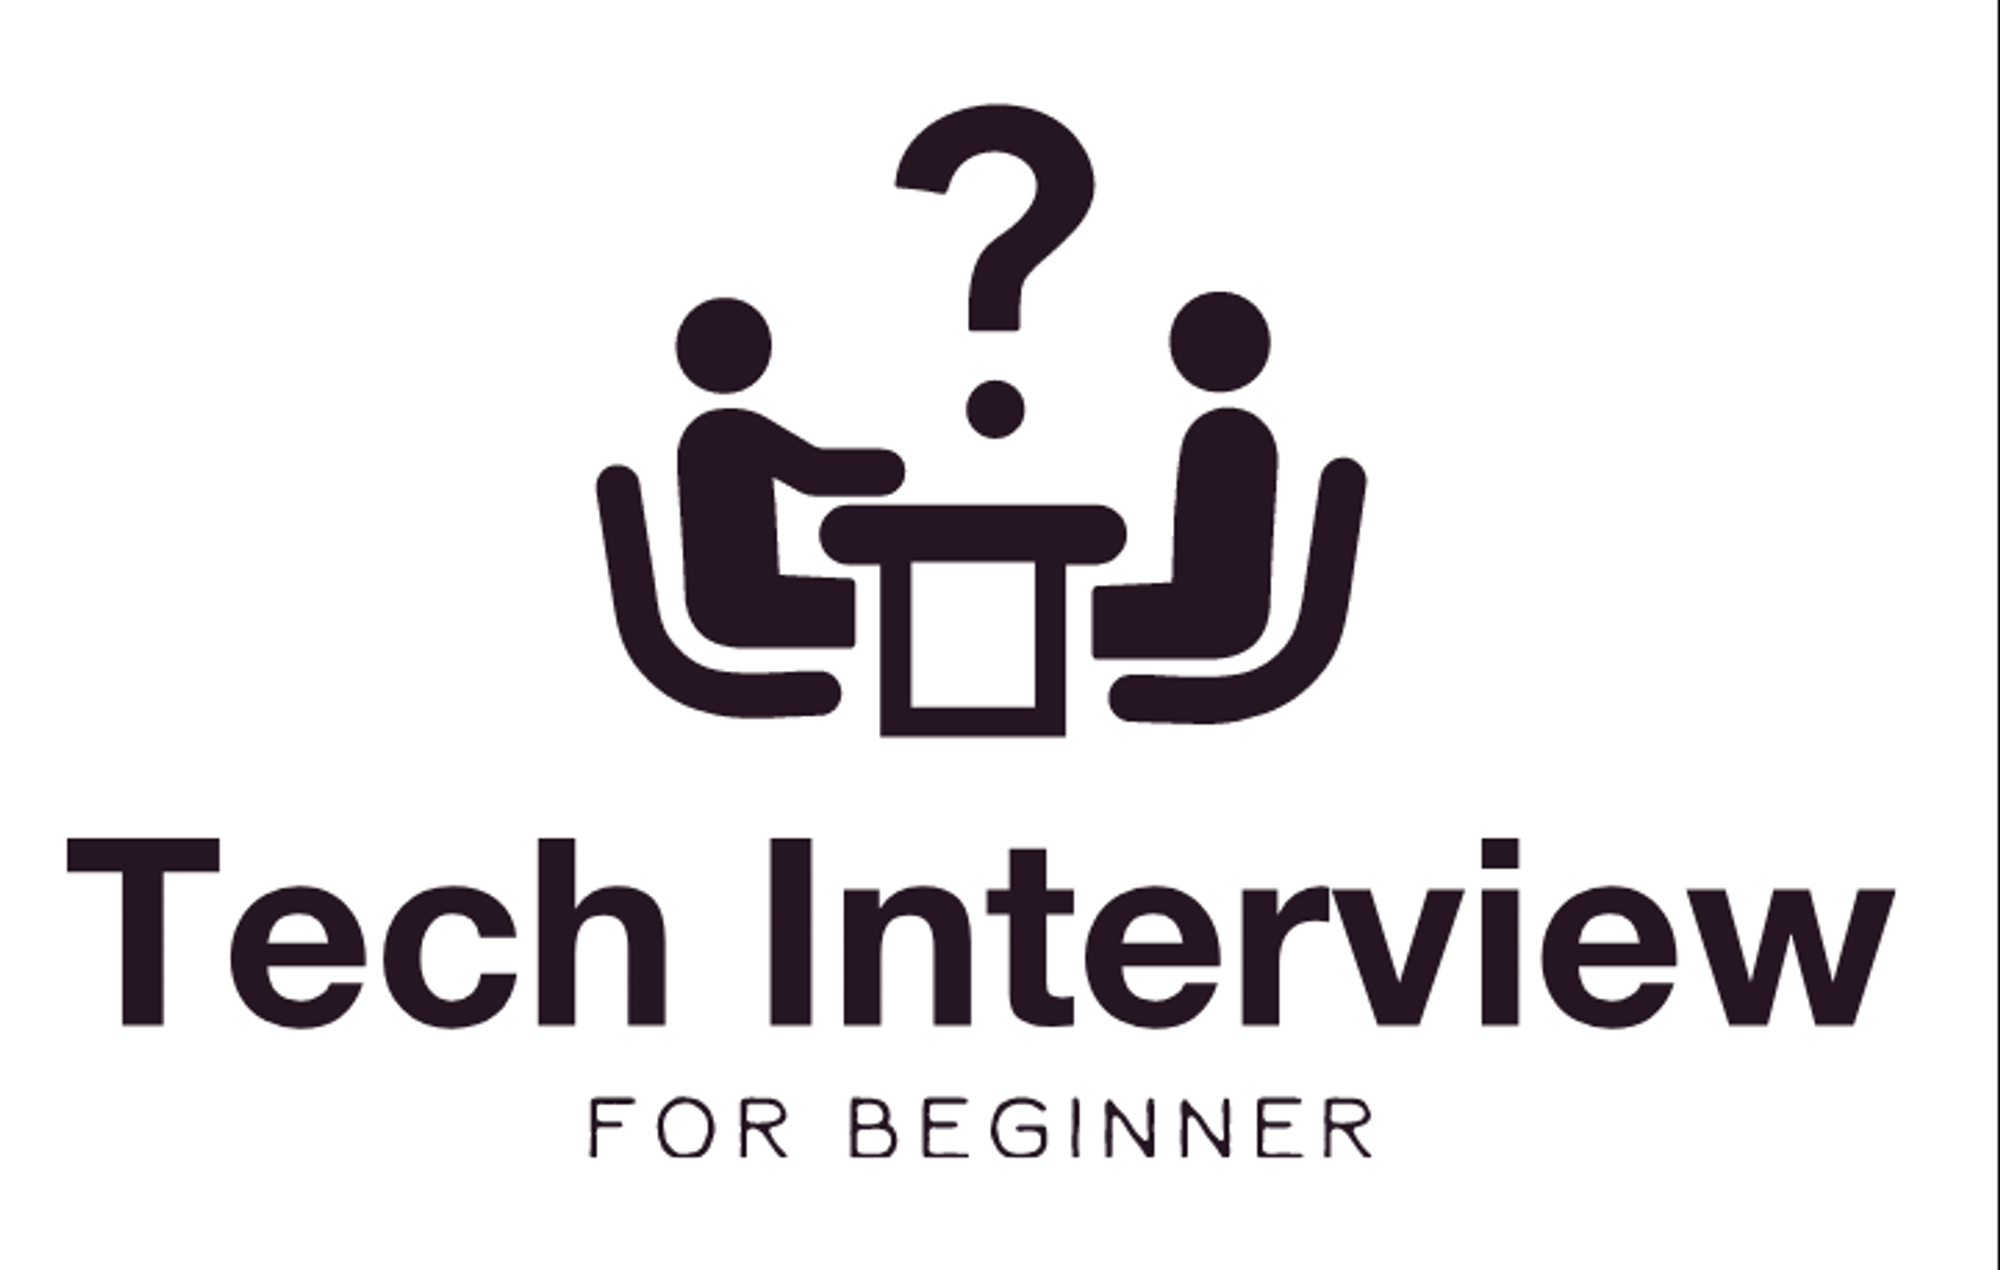 Interview_Question_for_Beginner/Python at master · JaeYeopHan/Interview_Question_for_Beginner